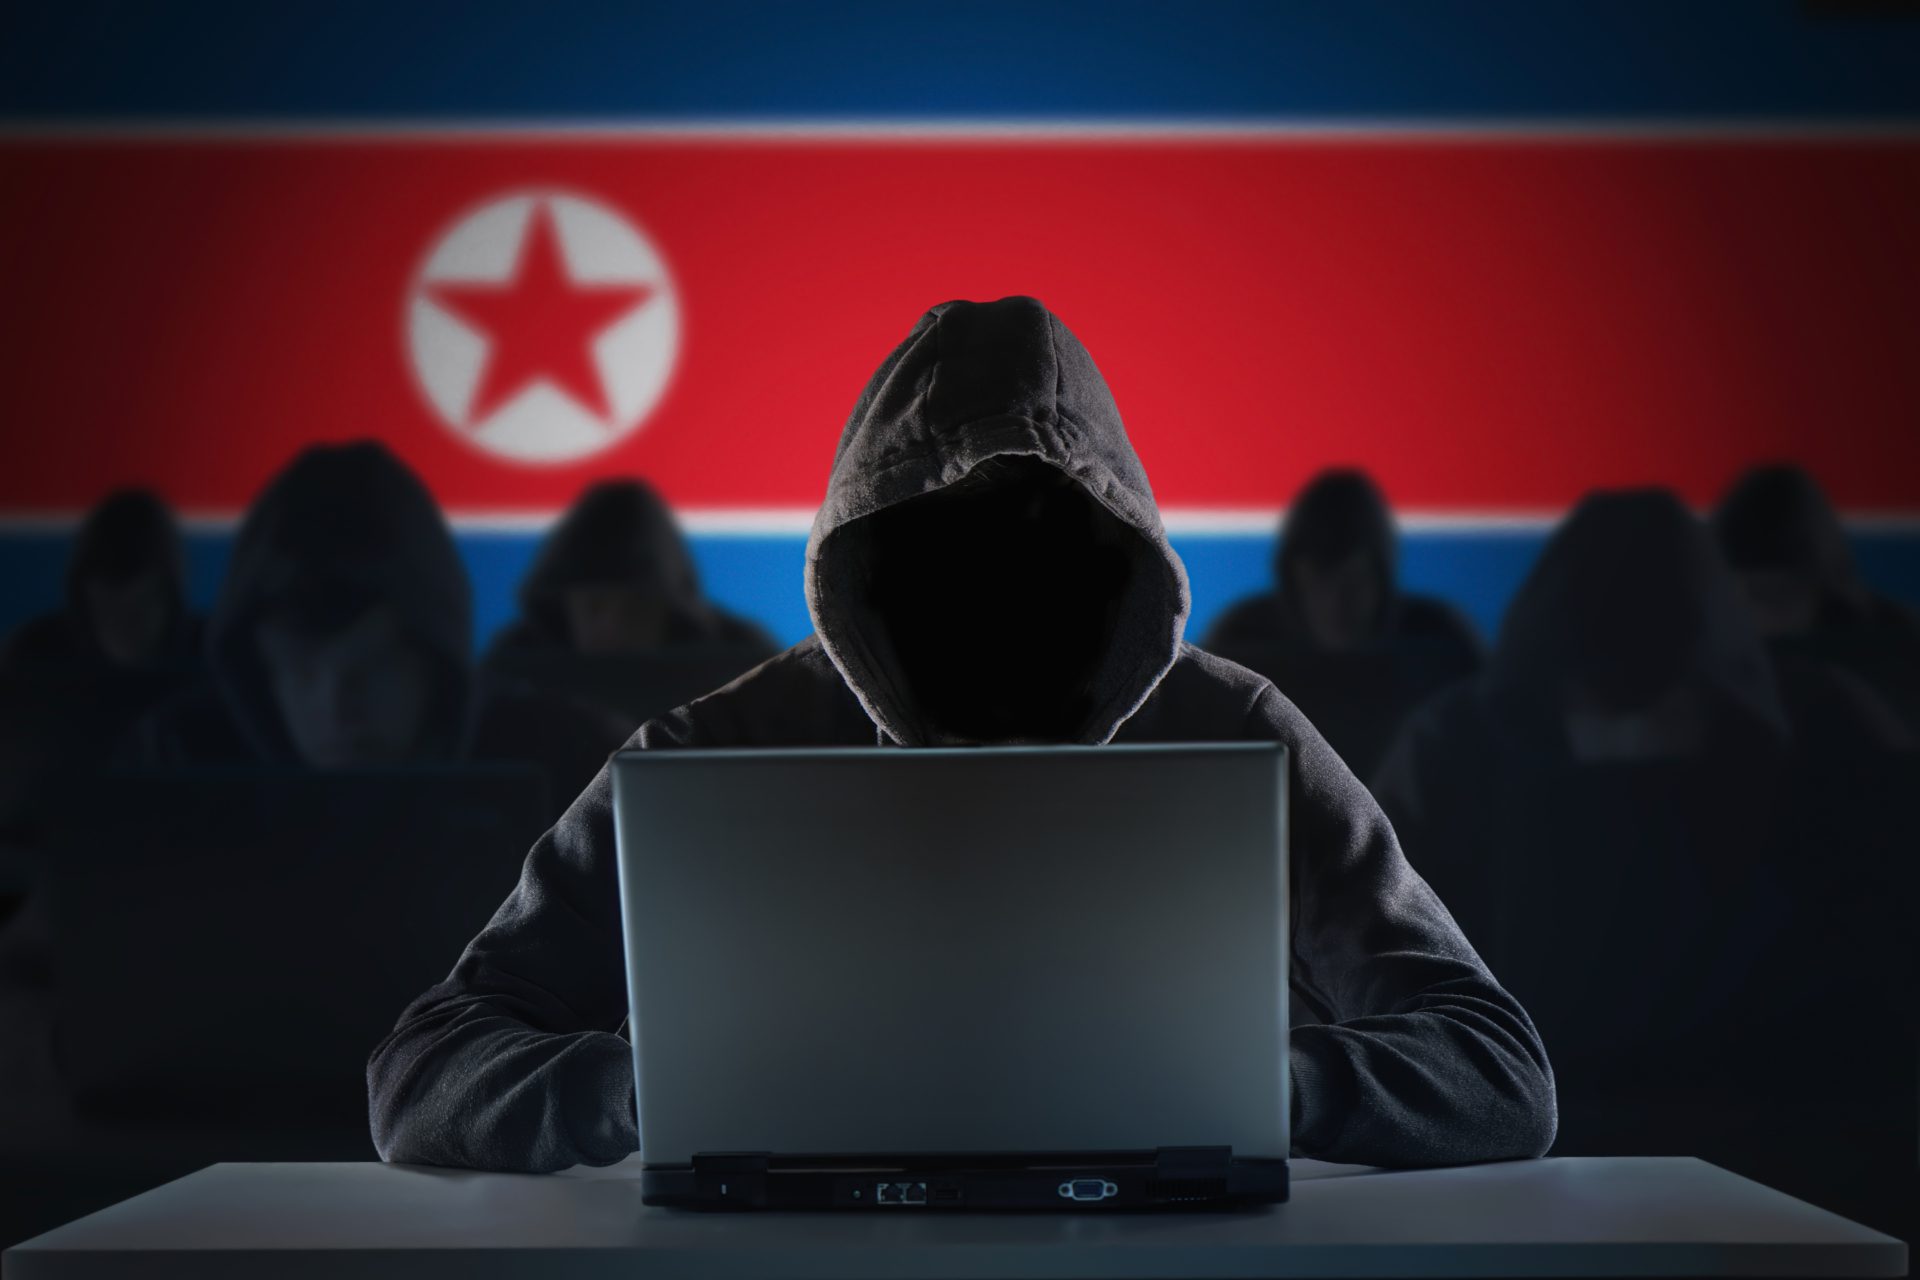 cryptocurrency theft in korea